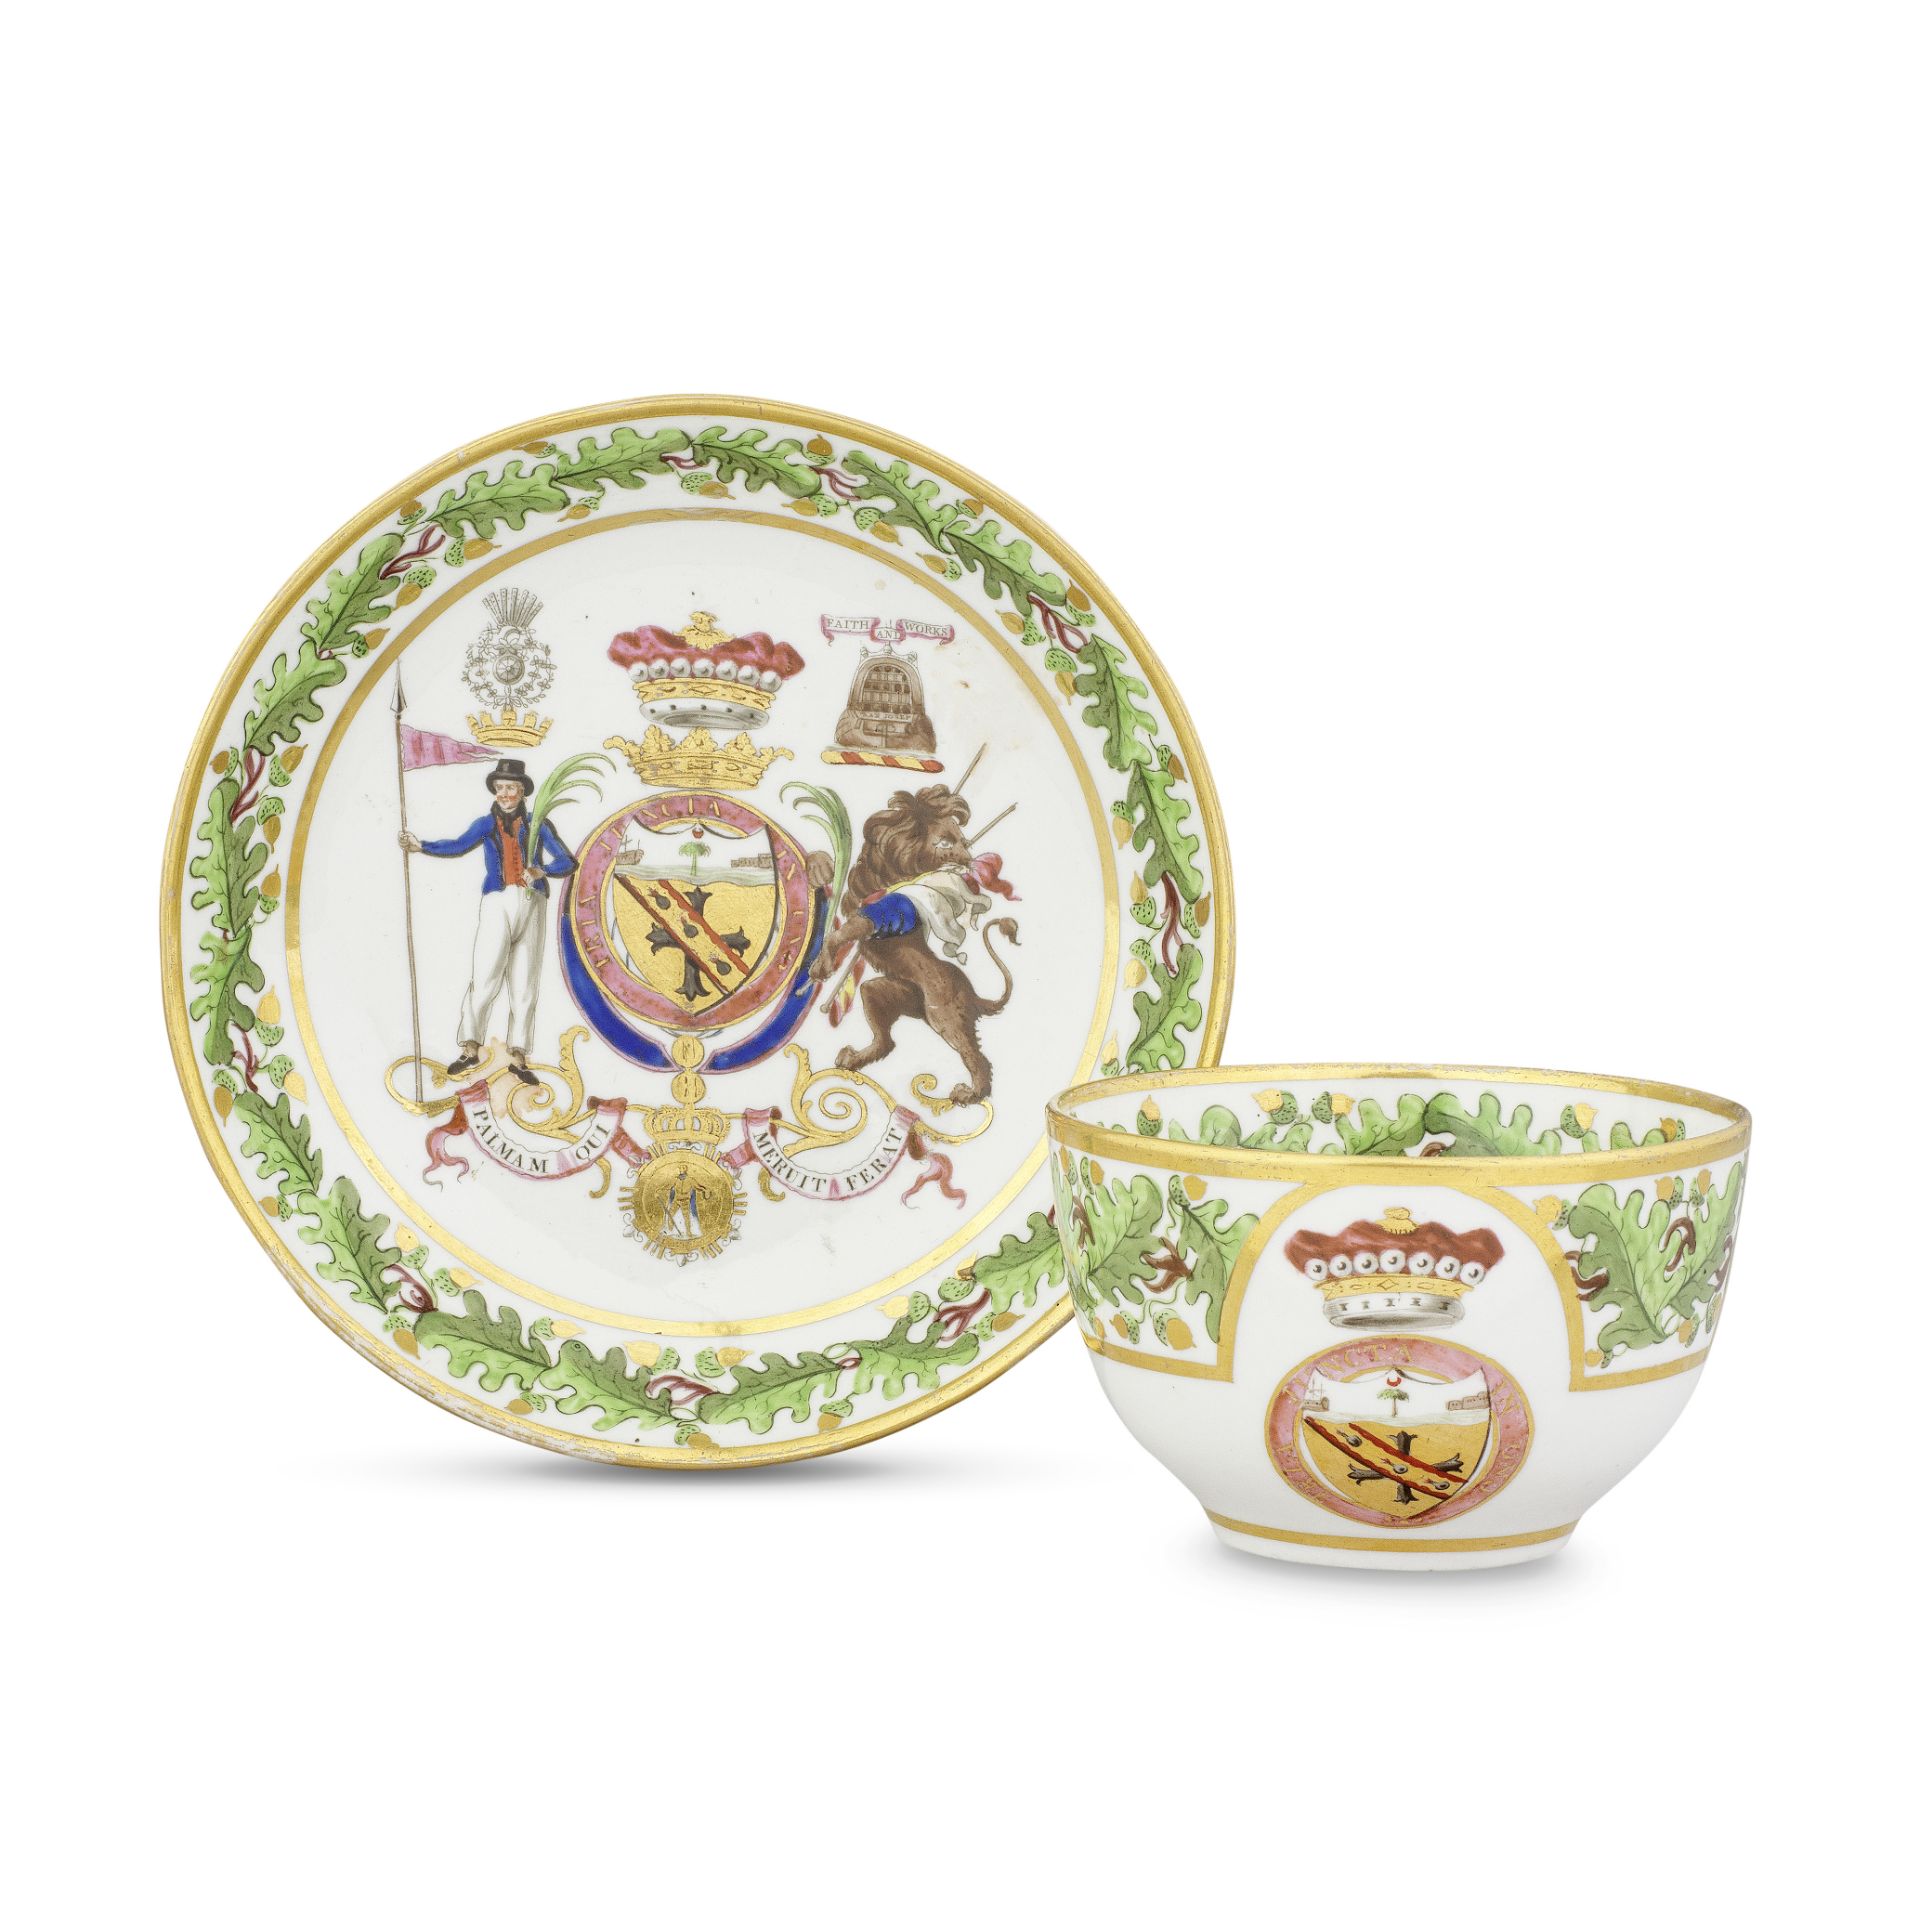 A further Coalport breakfast cup and saucer from the 'Nelson Set Tea Service', circa 1802